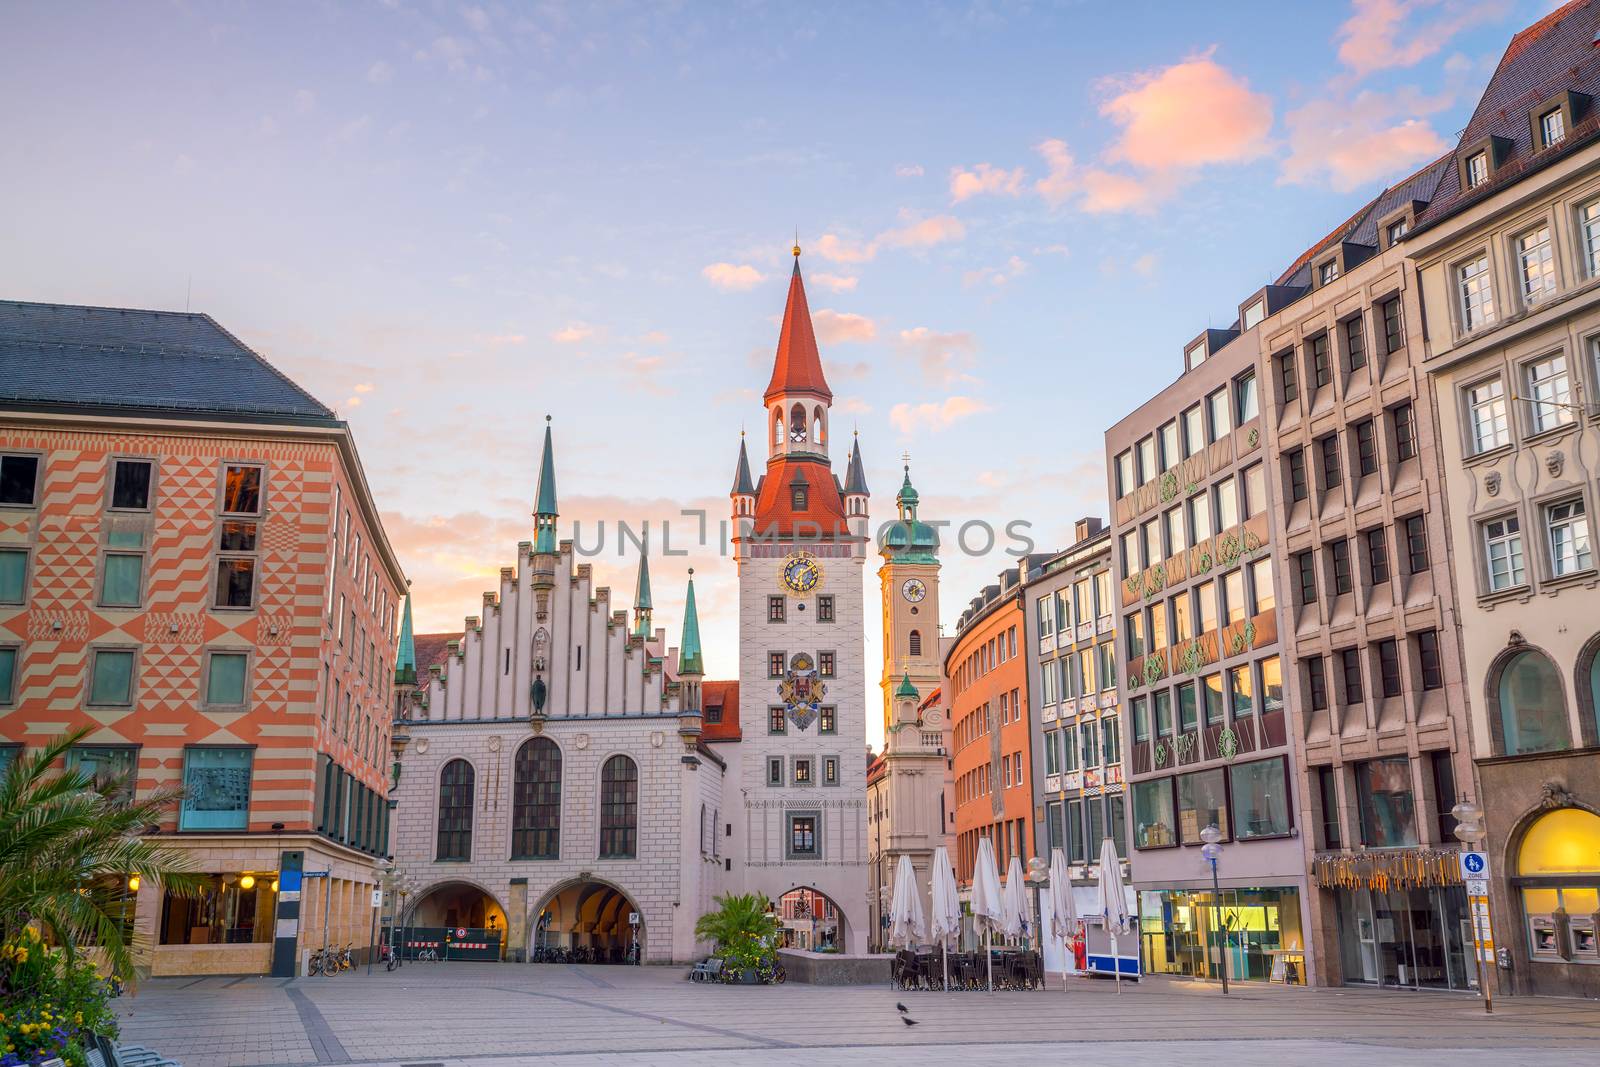 Old Town Hall at Marienplatz Square in Munich by f11photo